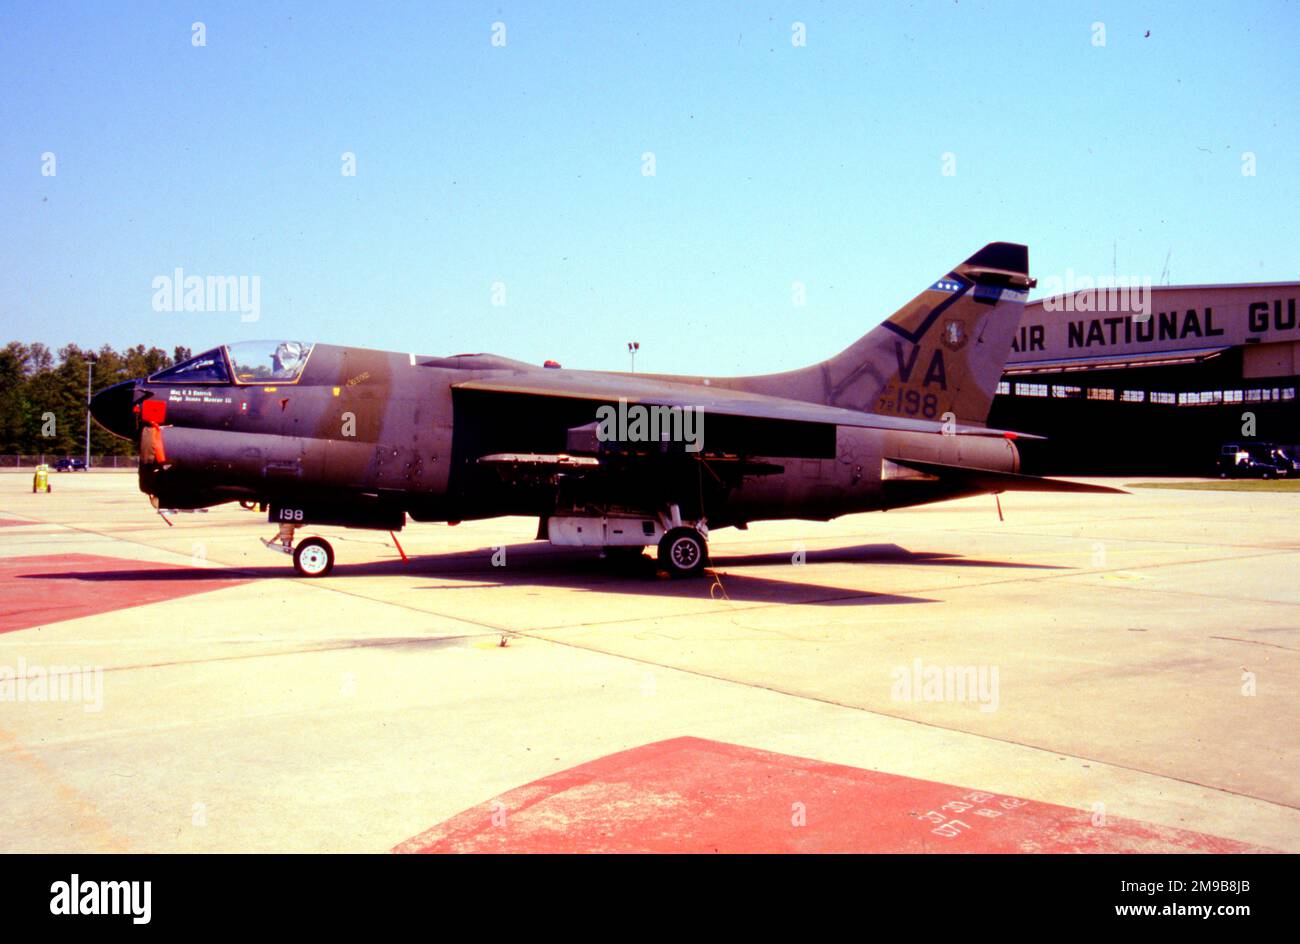 United States Air Force (USAF) - Ling-Temco-Vought A-7D-12-CV Corsair II 72-0198 (msn D-320), of the 149th Tactical Fighter Squadron, Virginia Air National Guard. Stock Photo